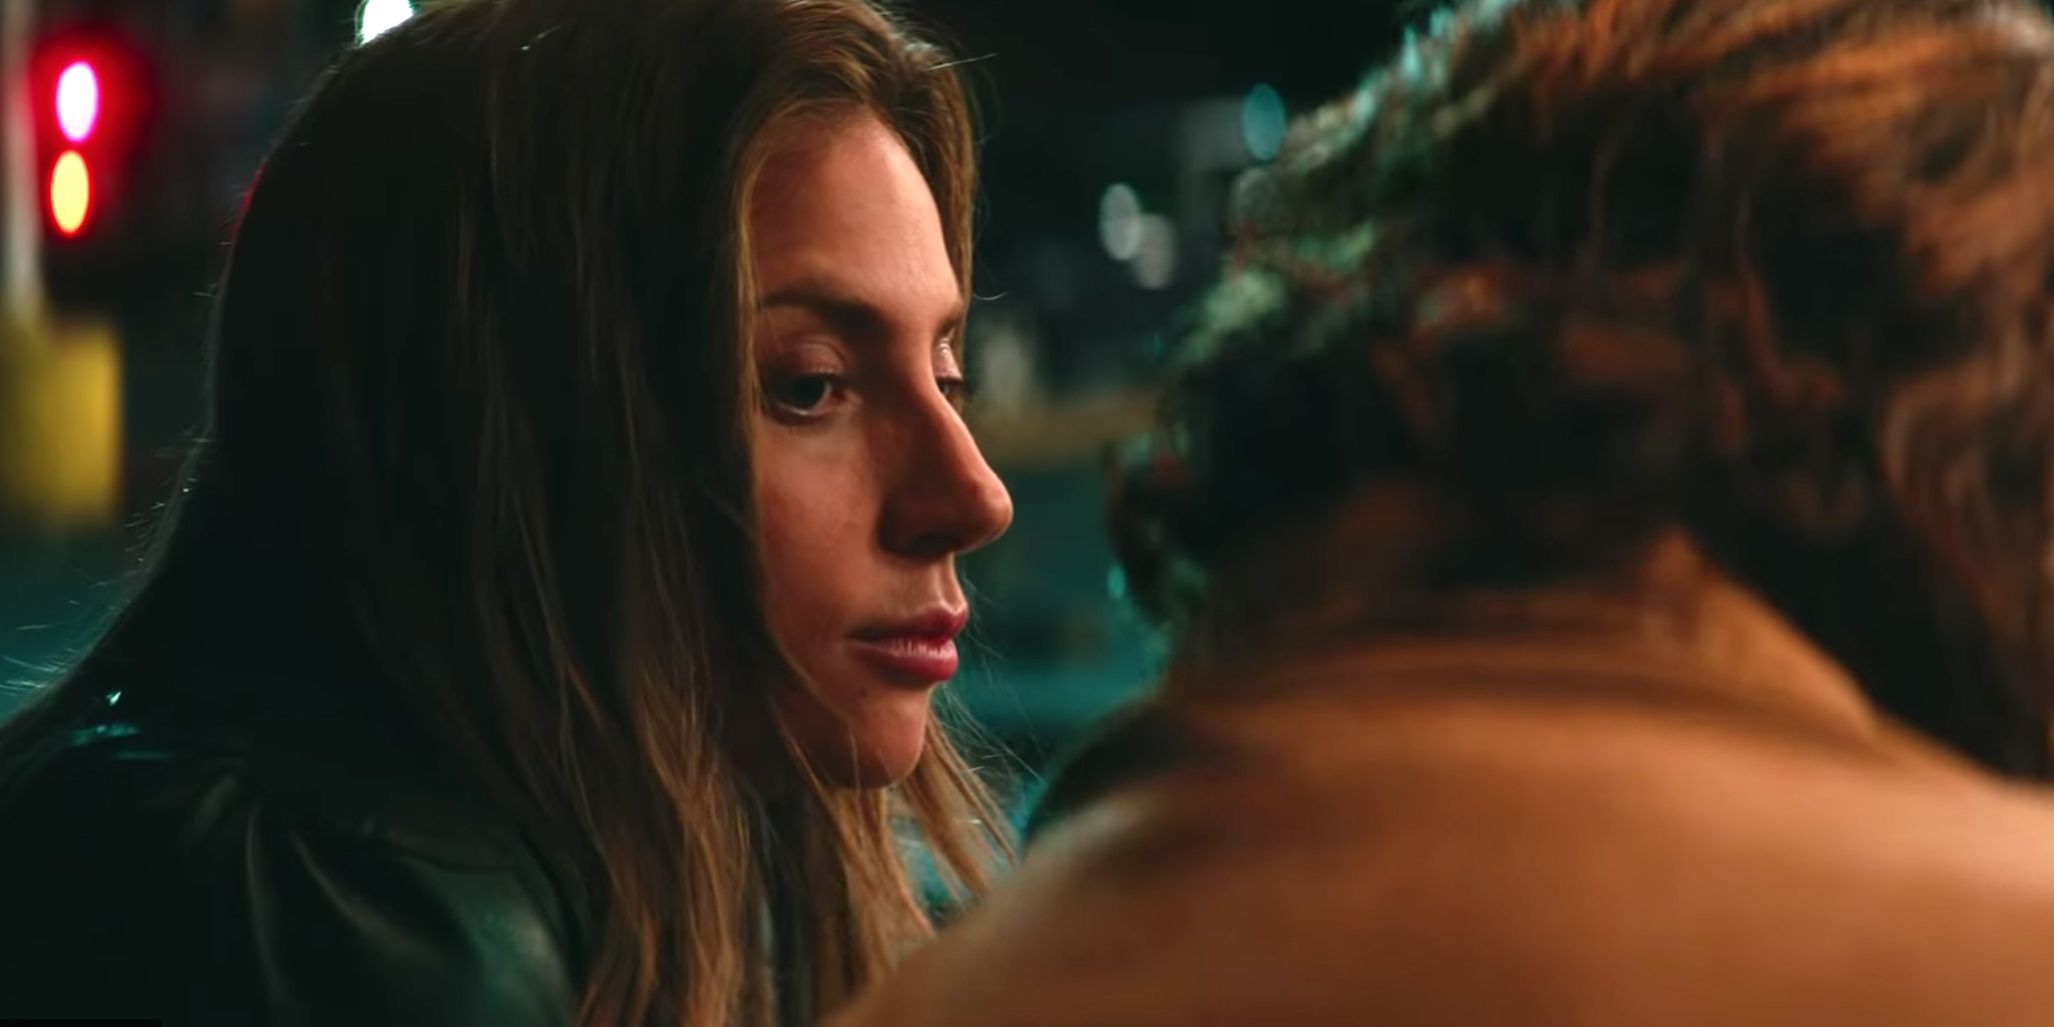 a star is born soundtrack release